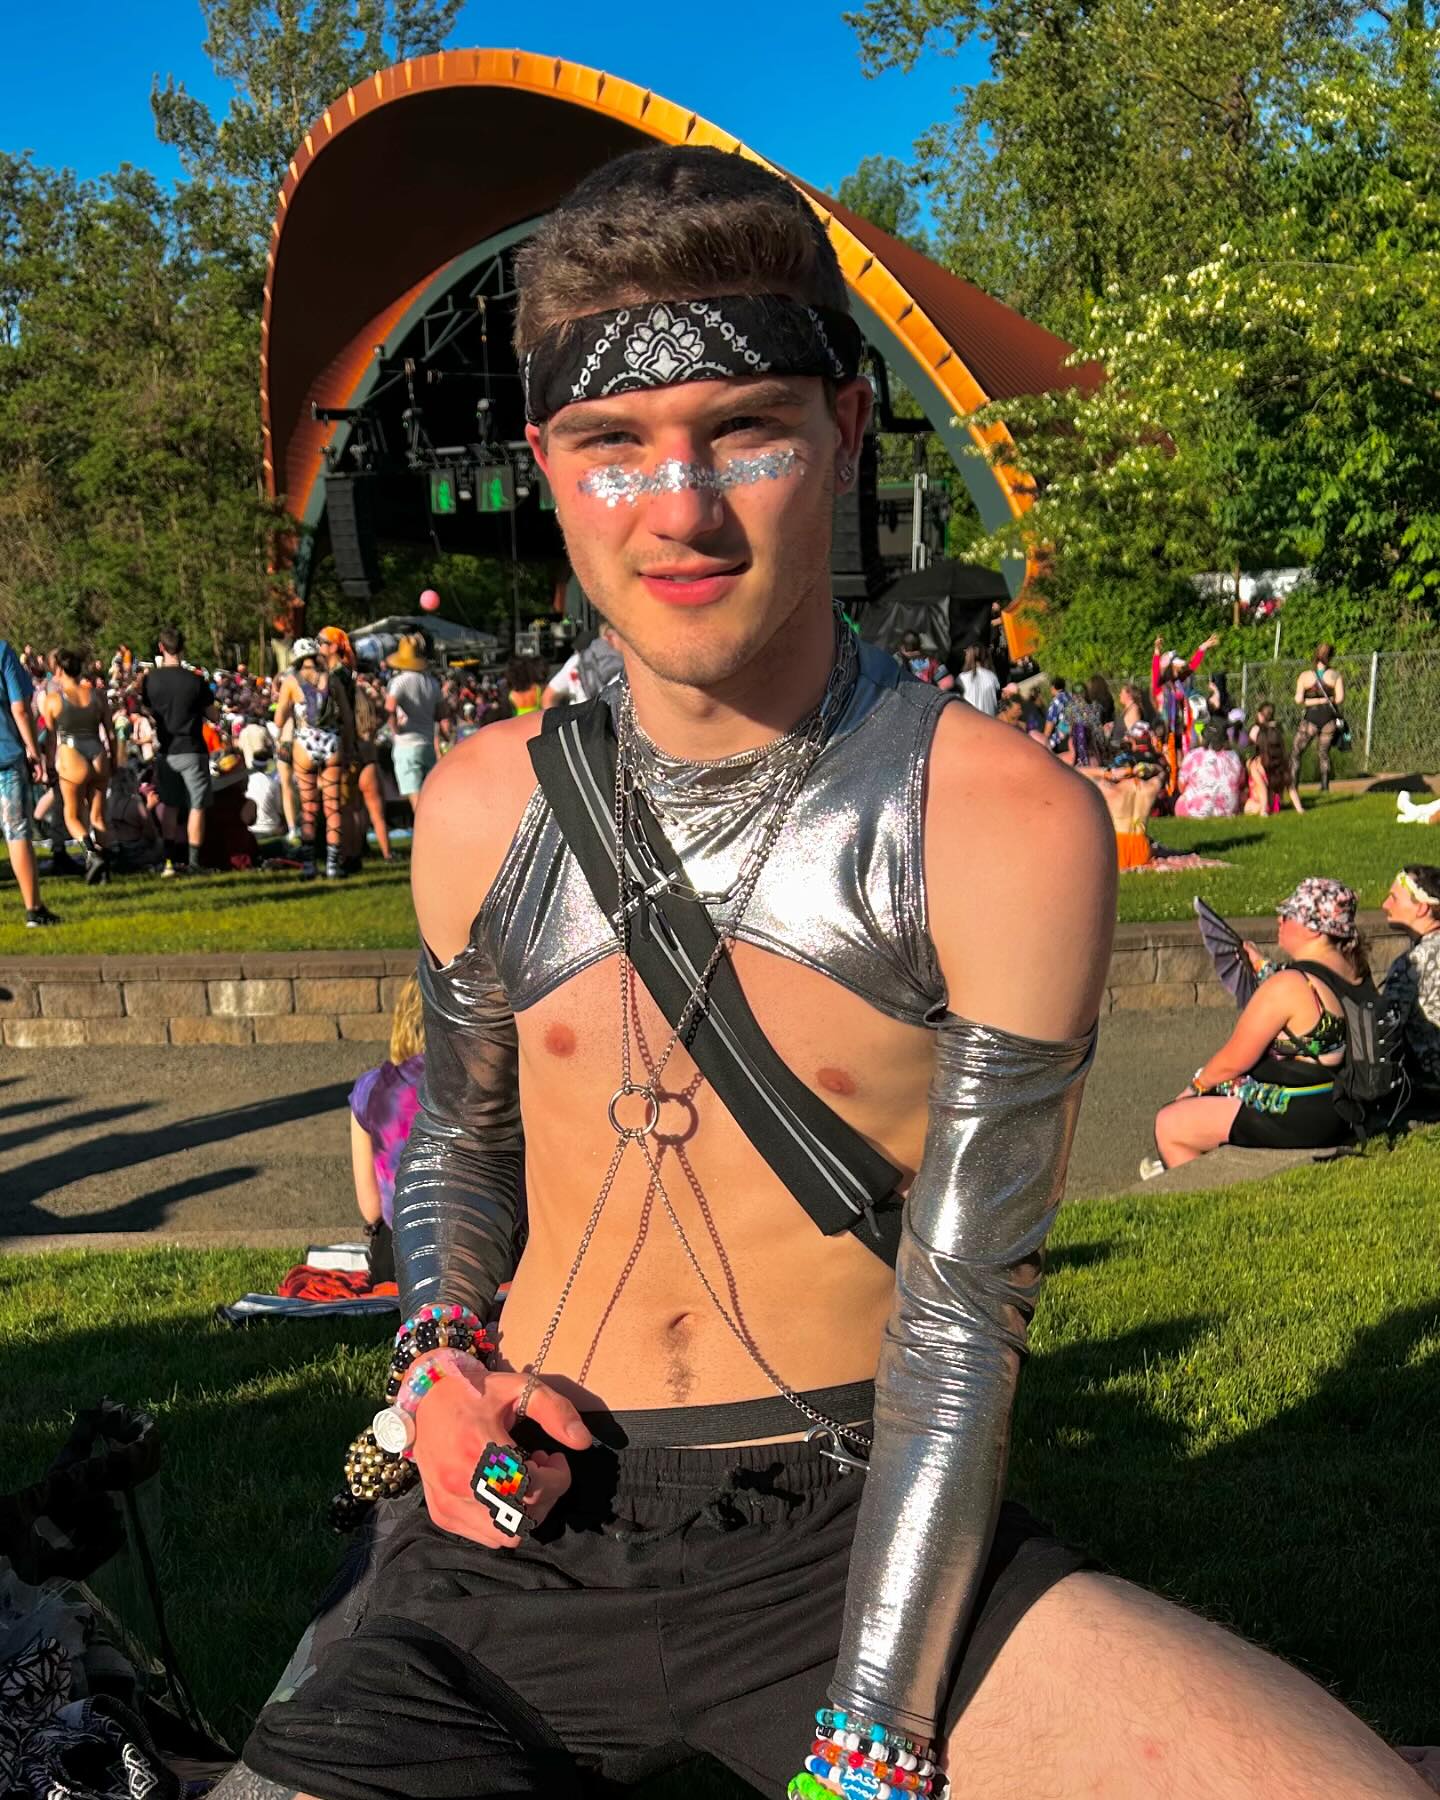 male raver in chrome metallic rave outfit with cutouts and glitter on face sits in front of stage in the festival crowd